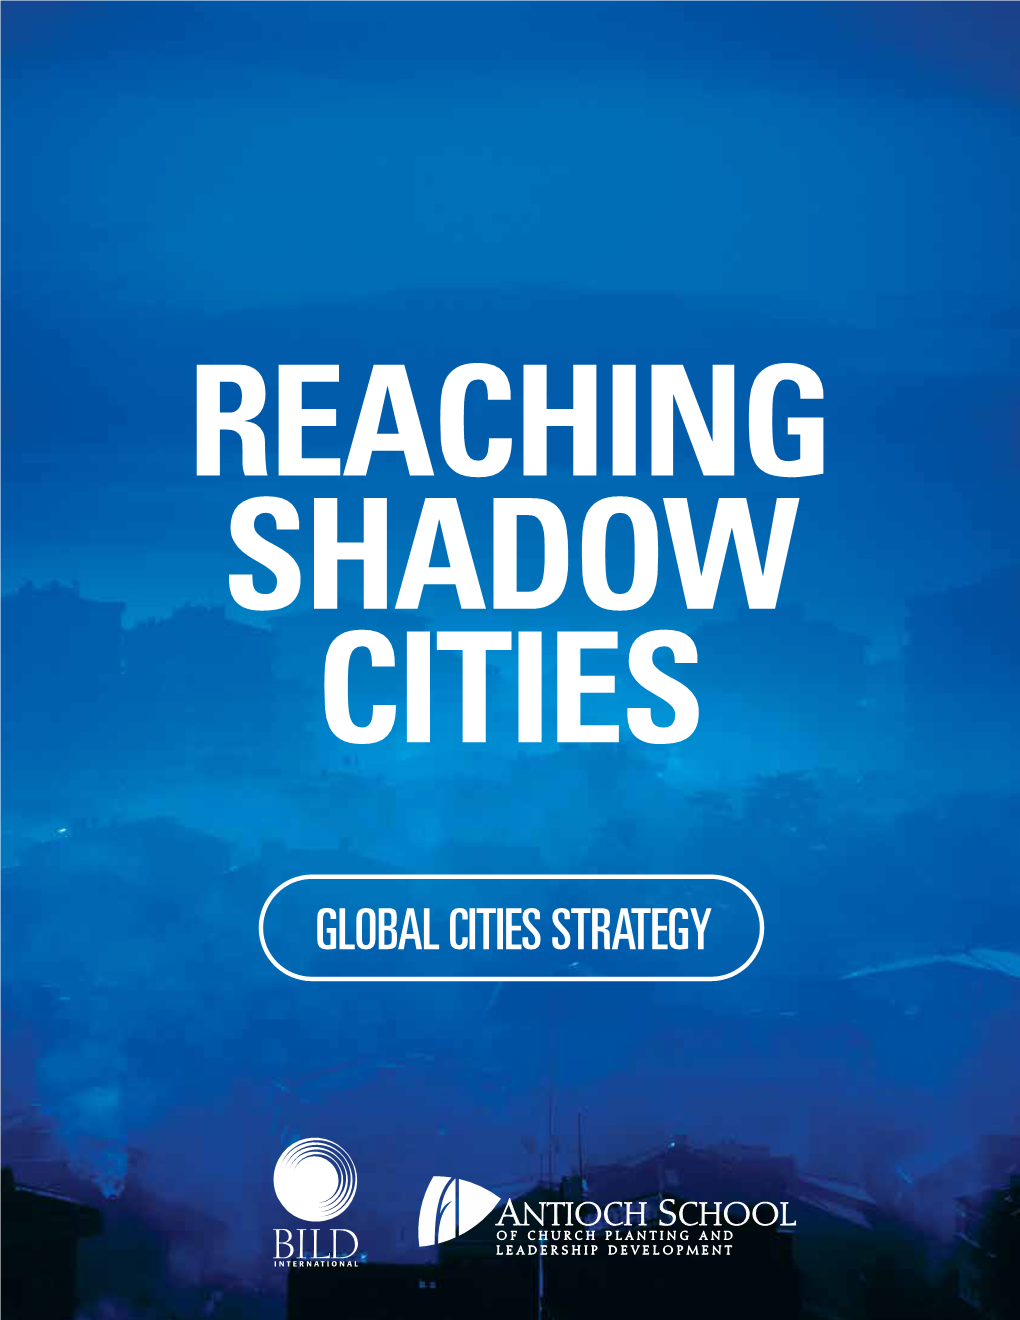 Global Cities Strategy